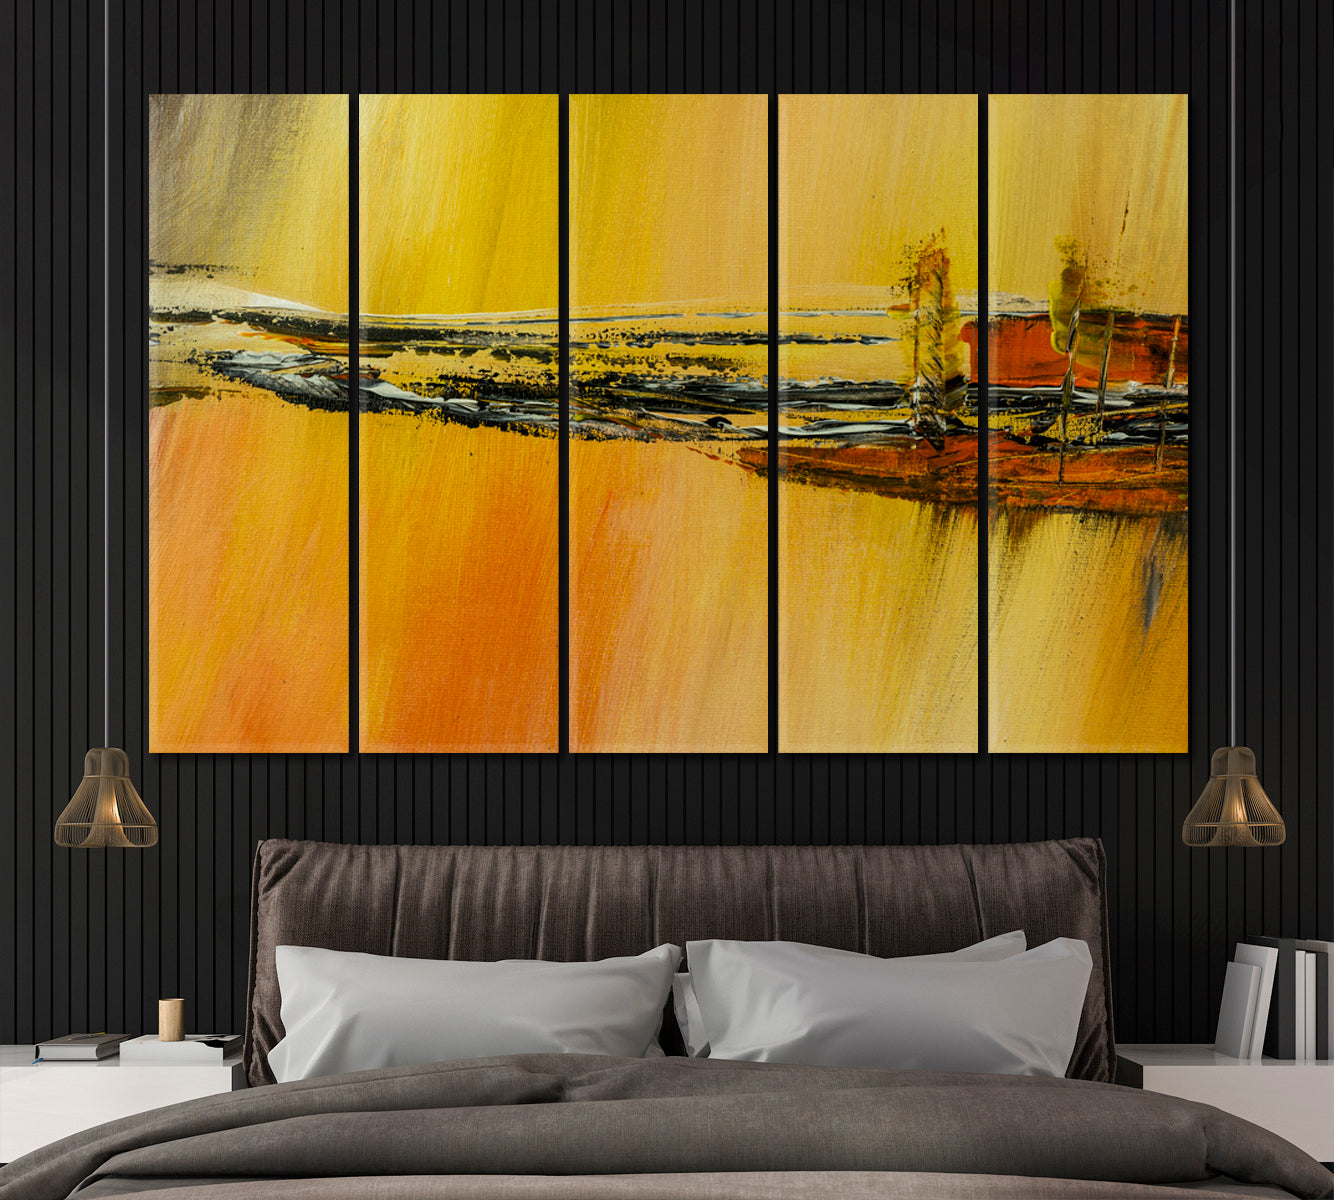 Abstract Autumn Landscape Canvas Print ArtLexy 5 Panels 36"x24" inches 